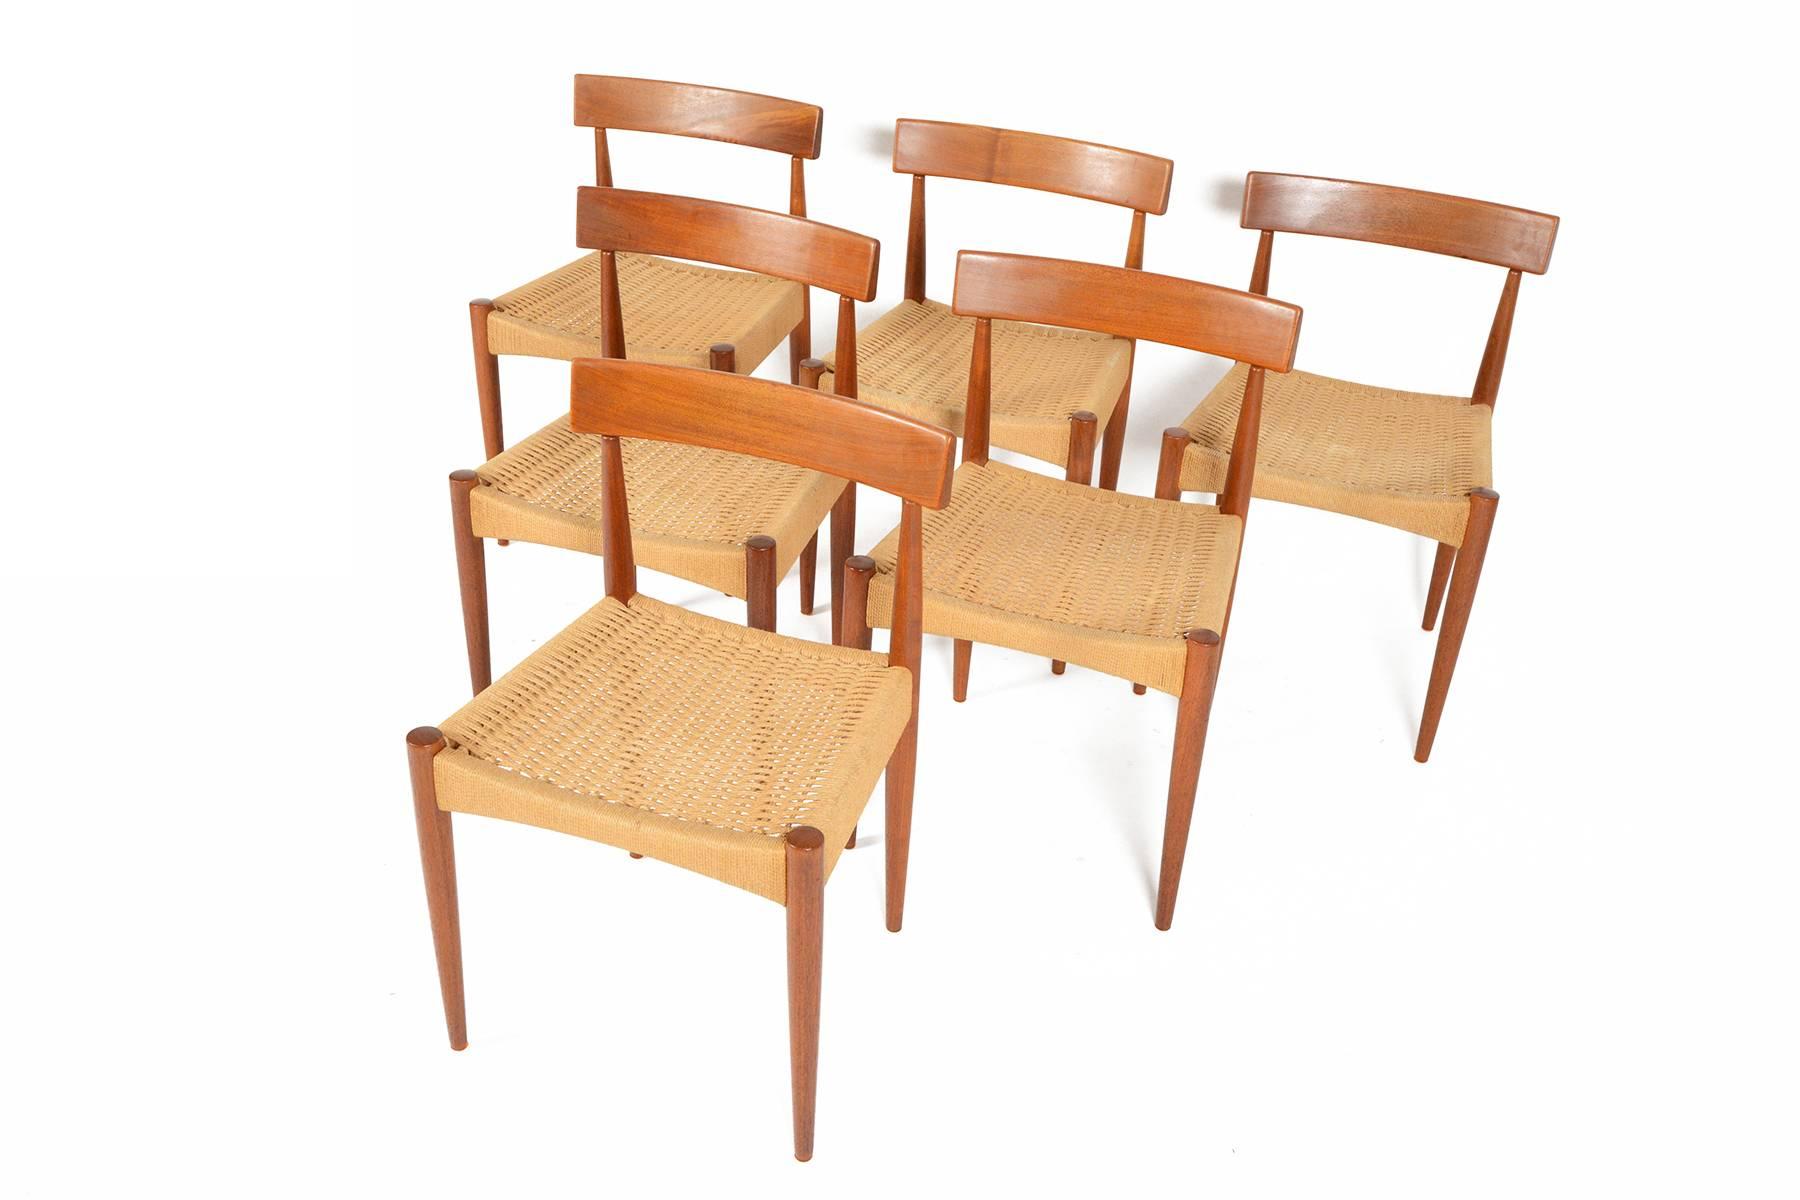 Designed by Arne Hovmand Olsen for Mogens, Kold, this gorgeous set of six Danish modern dining chairs are a quintessential addition for any Scandinavian inspired dining room. Each chair features a curved teak back rest and solid teak spindle legs.